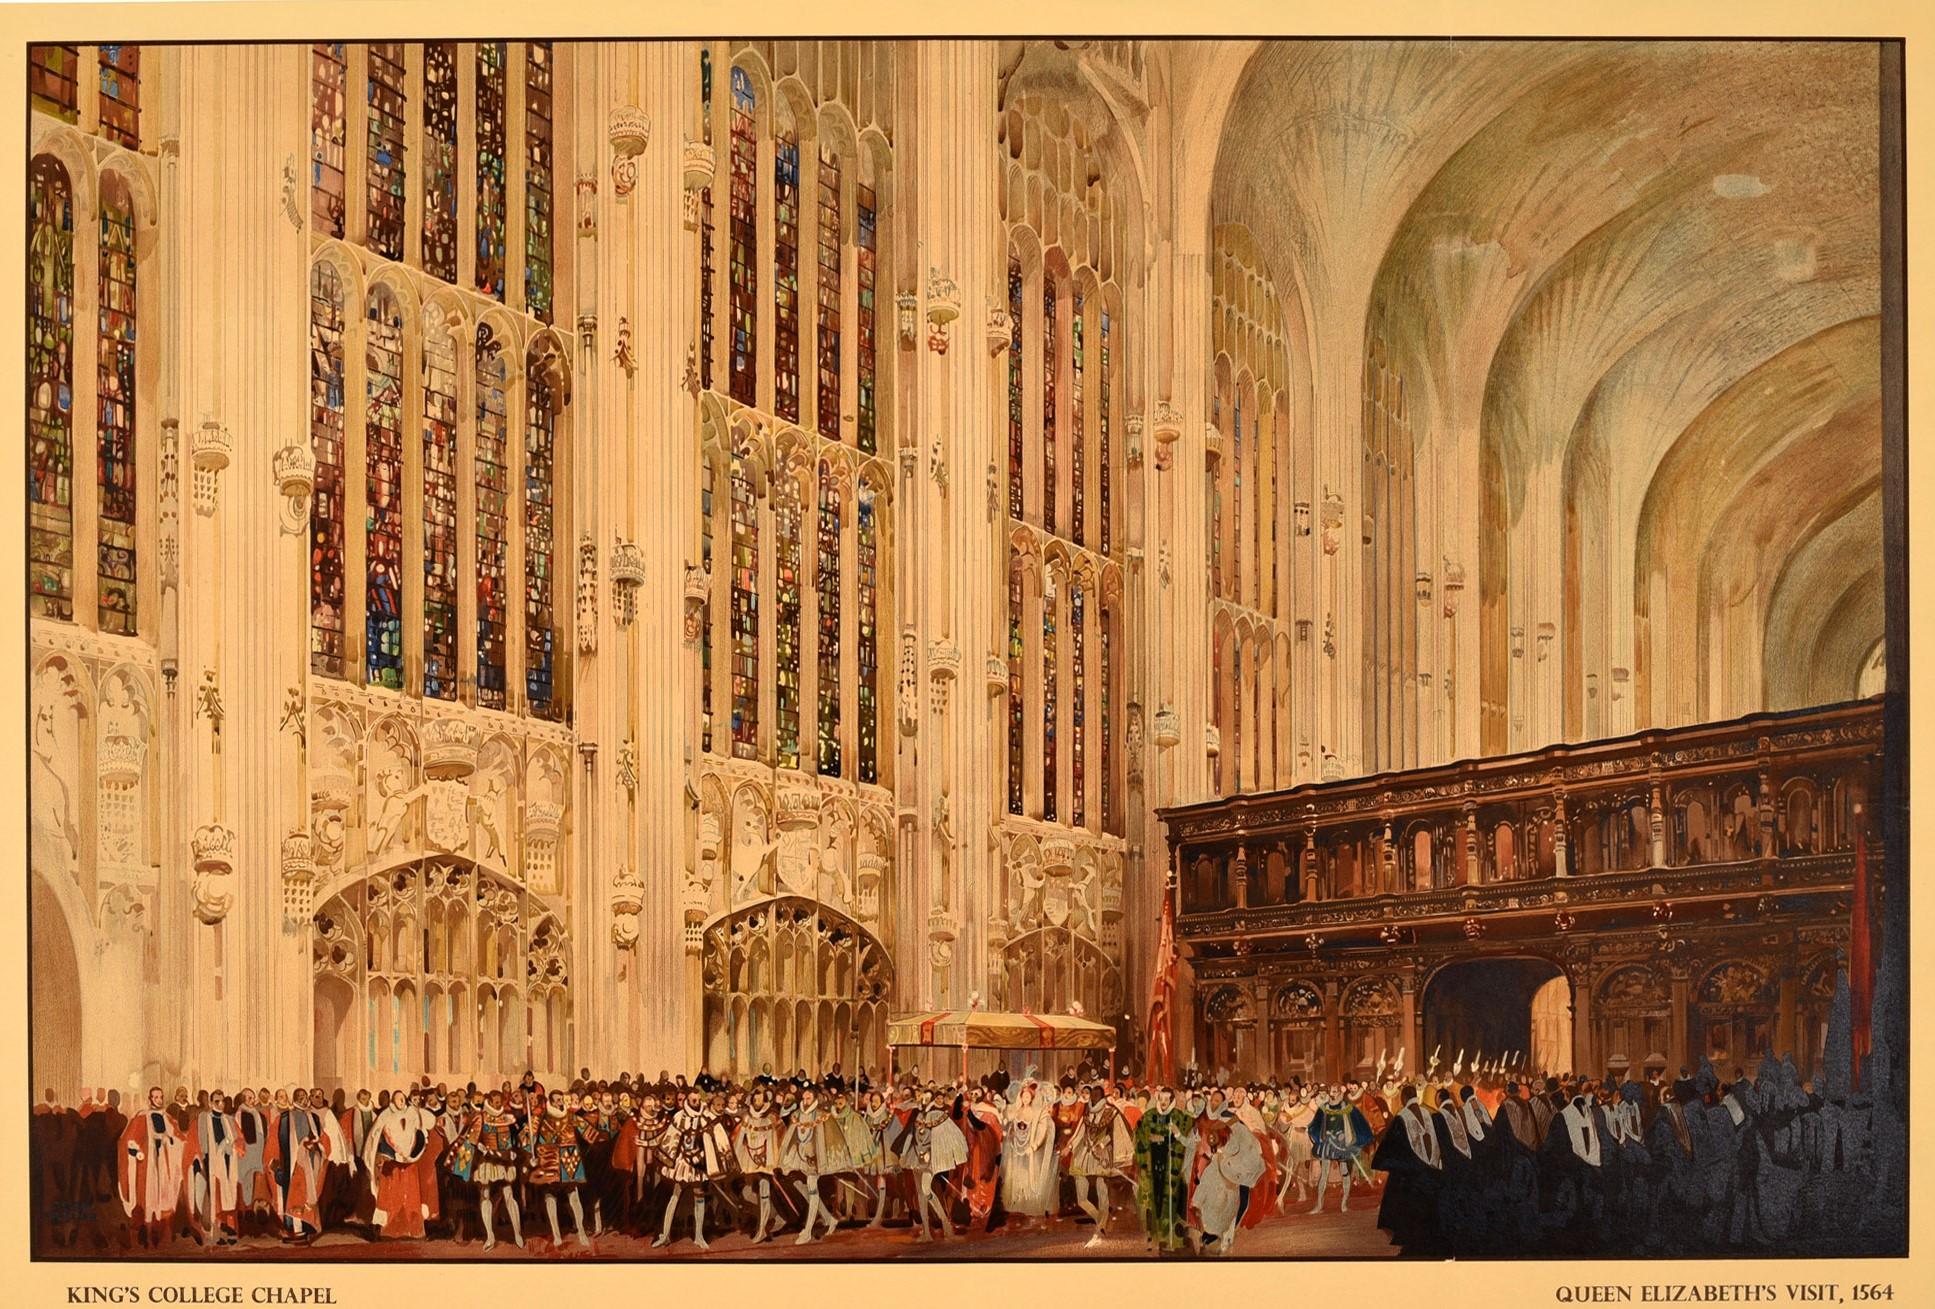 Original vintage travel poster for Cambridge issued by British Railways featuring great artwork by the notable artist Fred Taylor (1875-1963) depicting Queen Elizabeth's Visit to King's College Chapel in August 1564 with crowds in period Elizabethan